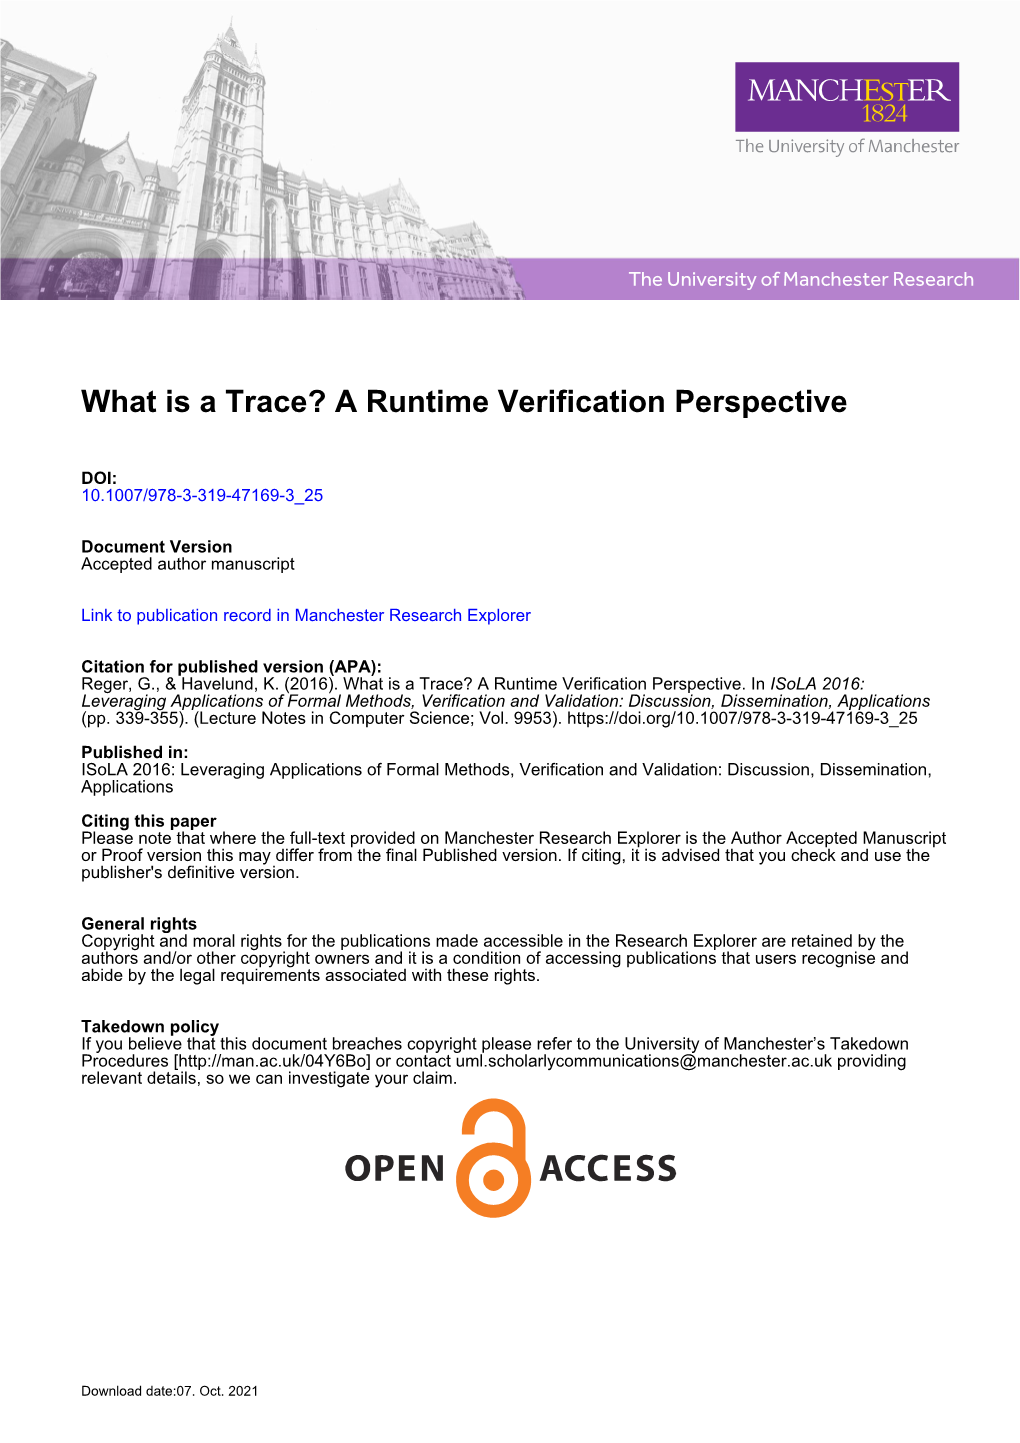 What Is a Trace? a Runtime Verification Perspective